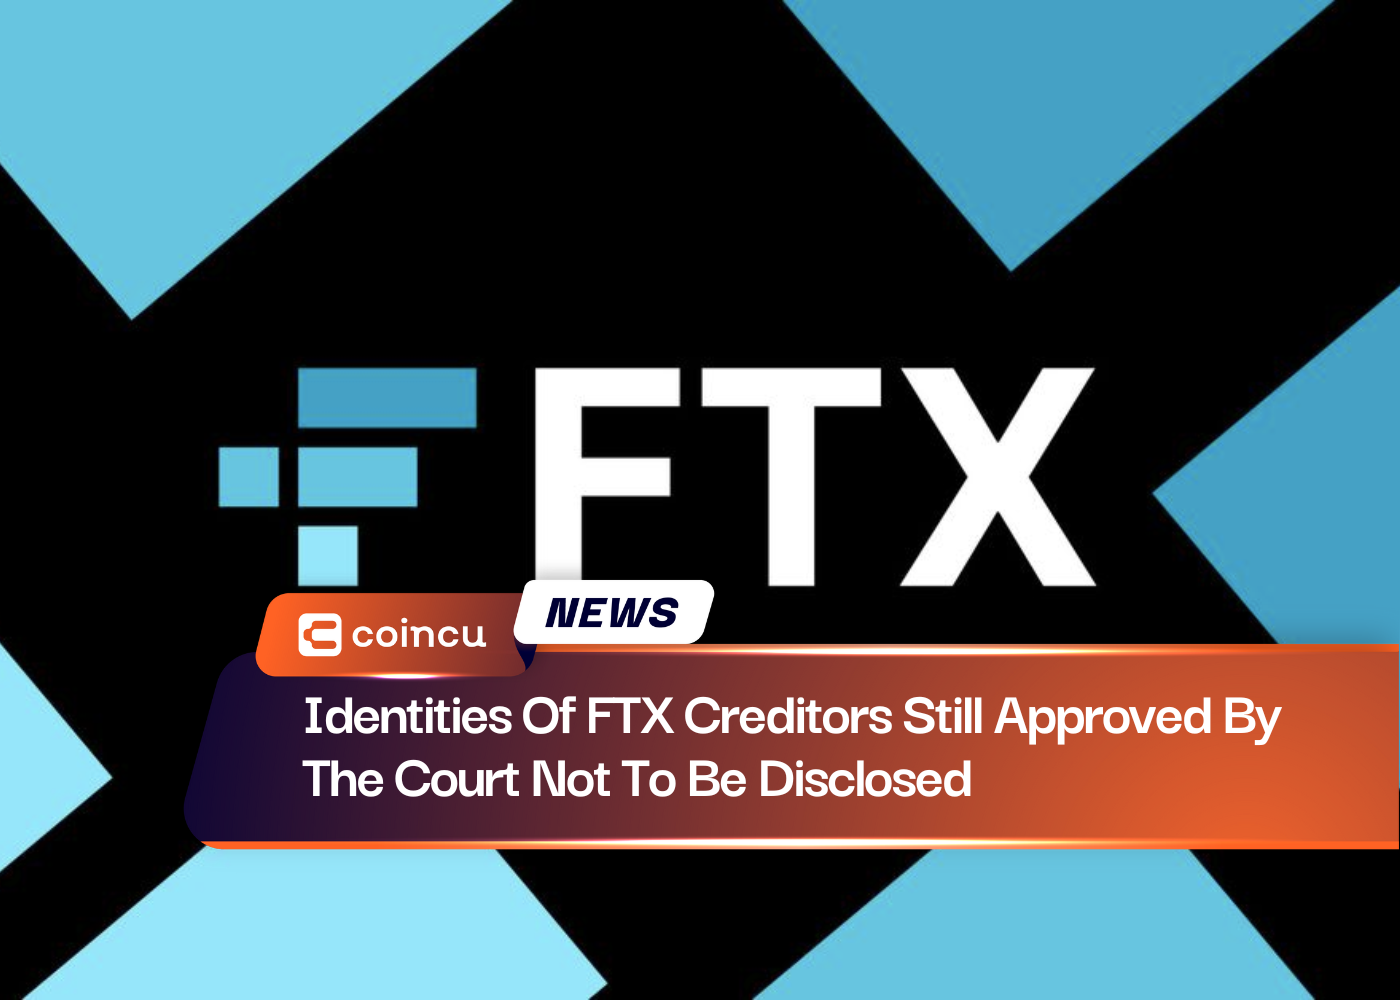 Identities Of FTX Creditors Still Approved By The Court Not To Be Disclosed